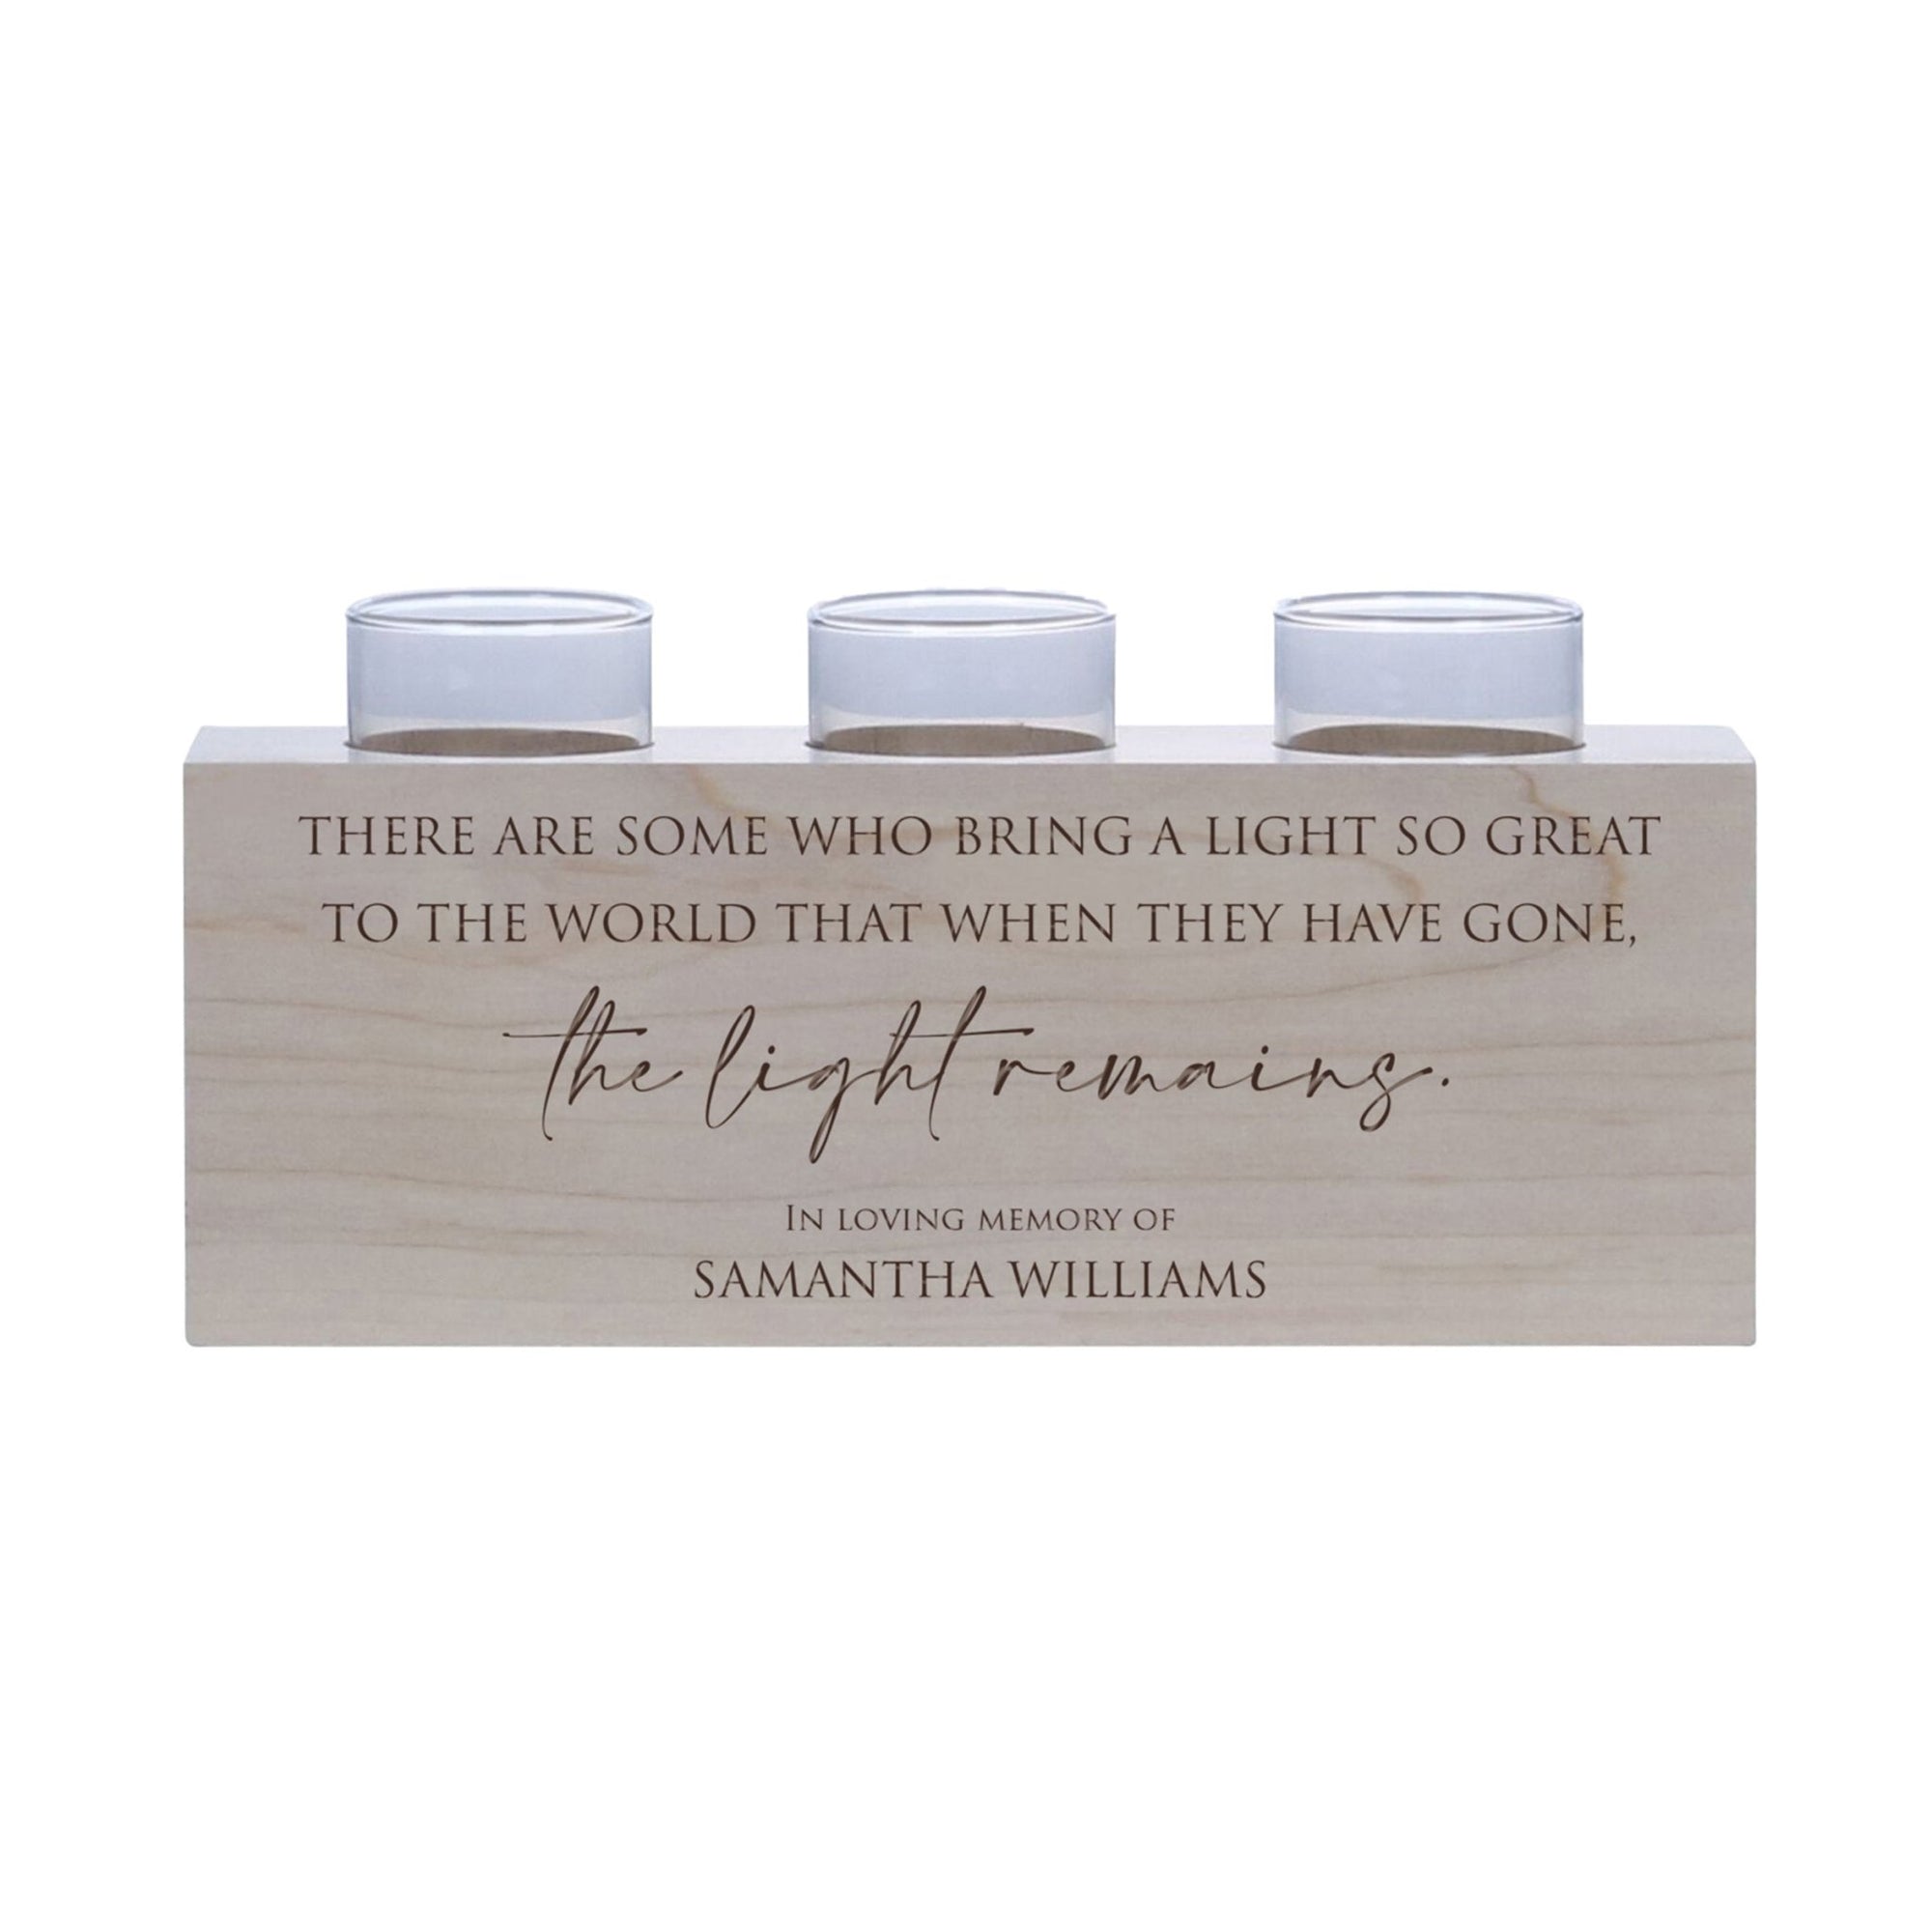 Personalized Memorial Decorative Table & Countertop 3 Votive Tealight Candle Holder Sympathy Gift - The Light Remains - LifeSong Milestones